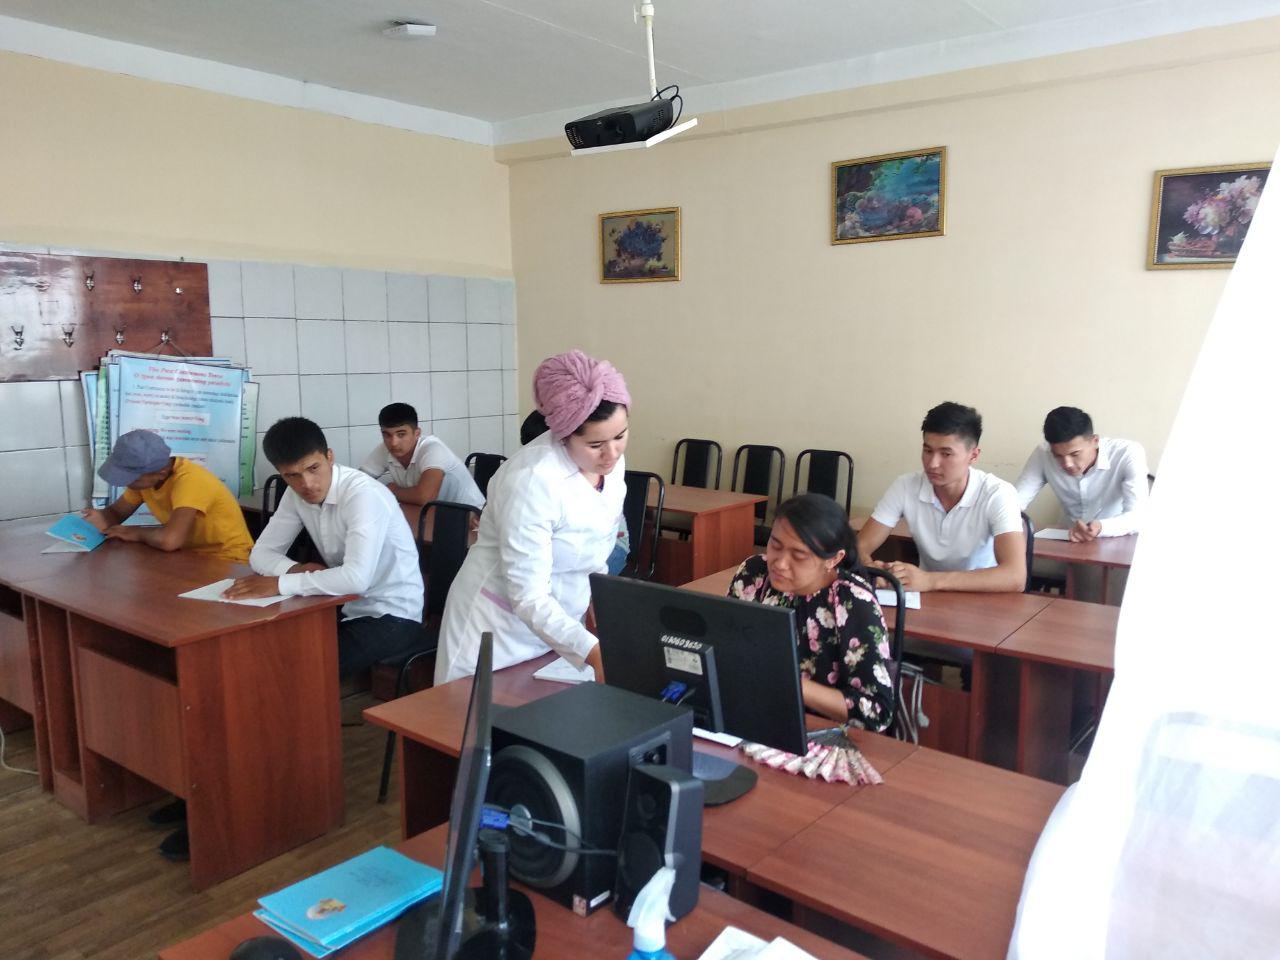 THE YOUTH OF THE MCG “KOSHARIK” AND “YAHSHI” ATTENDED ENGLISH CLASSES